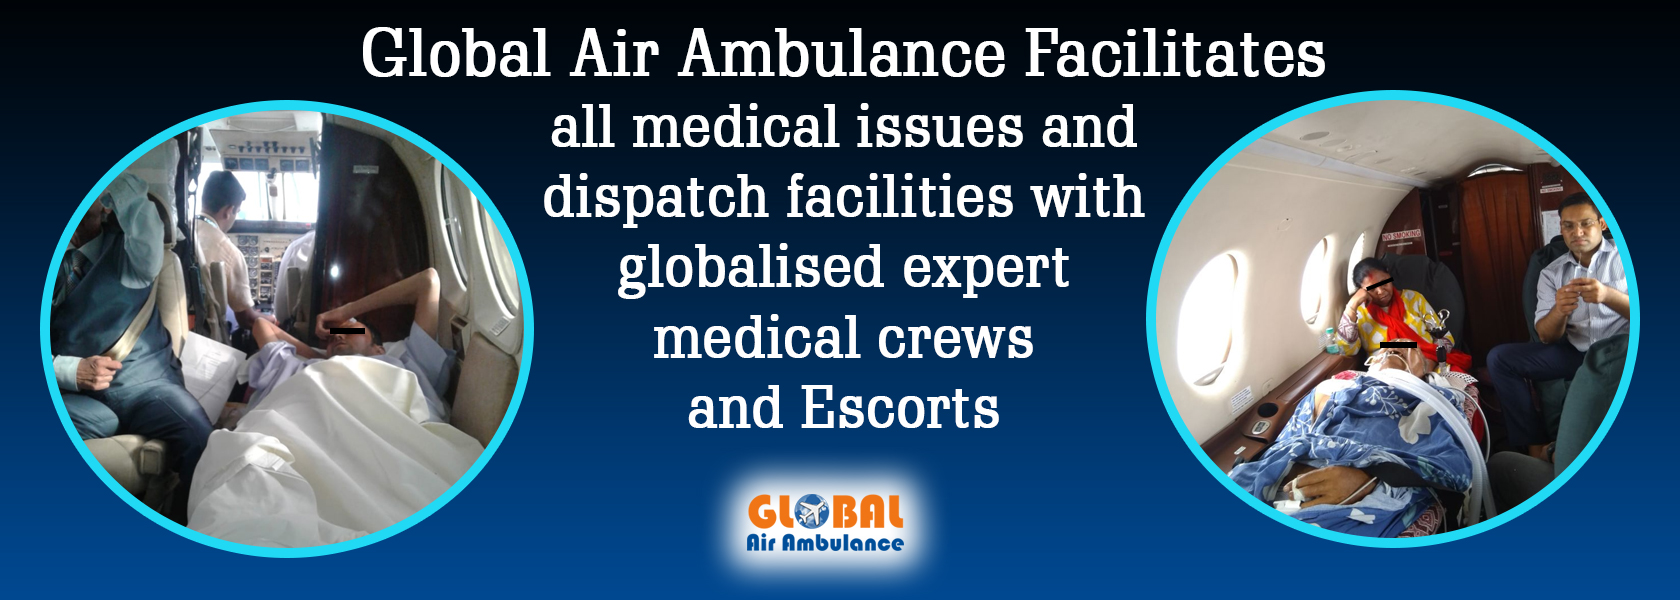 global air ambulance services in delhi cost | global air ambulance in delhi